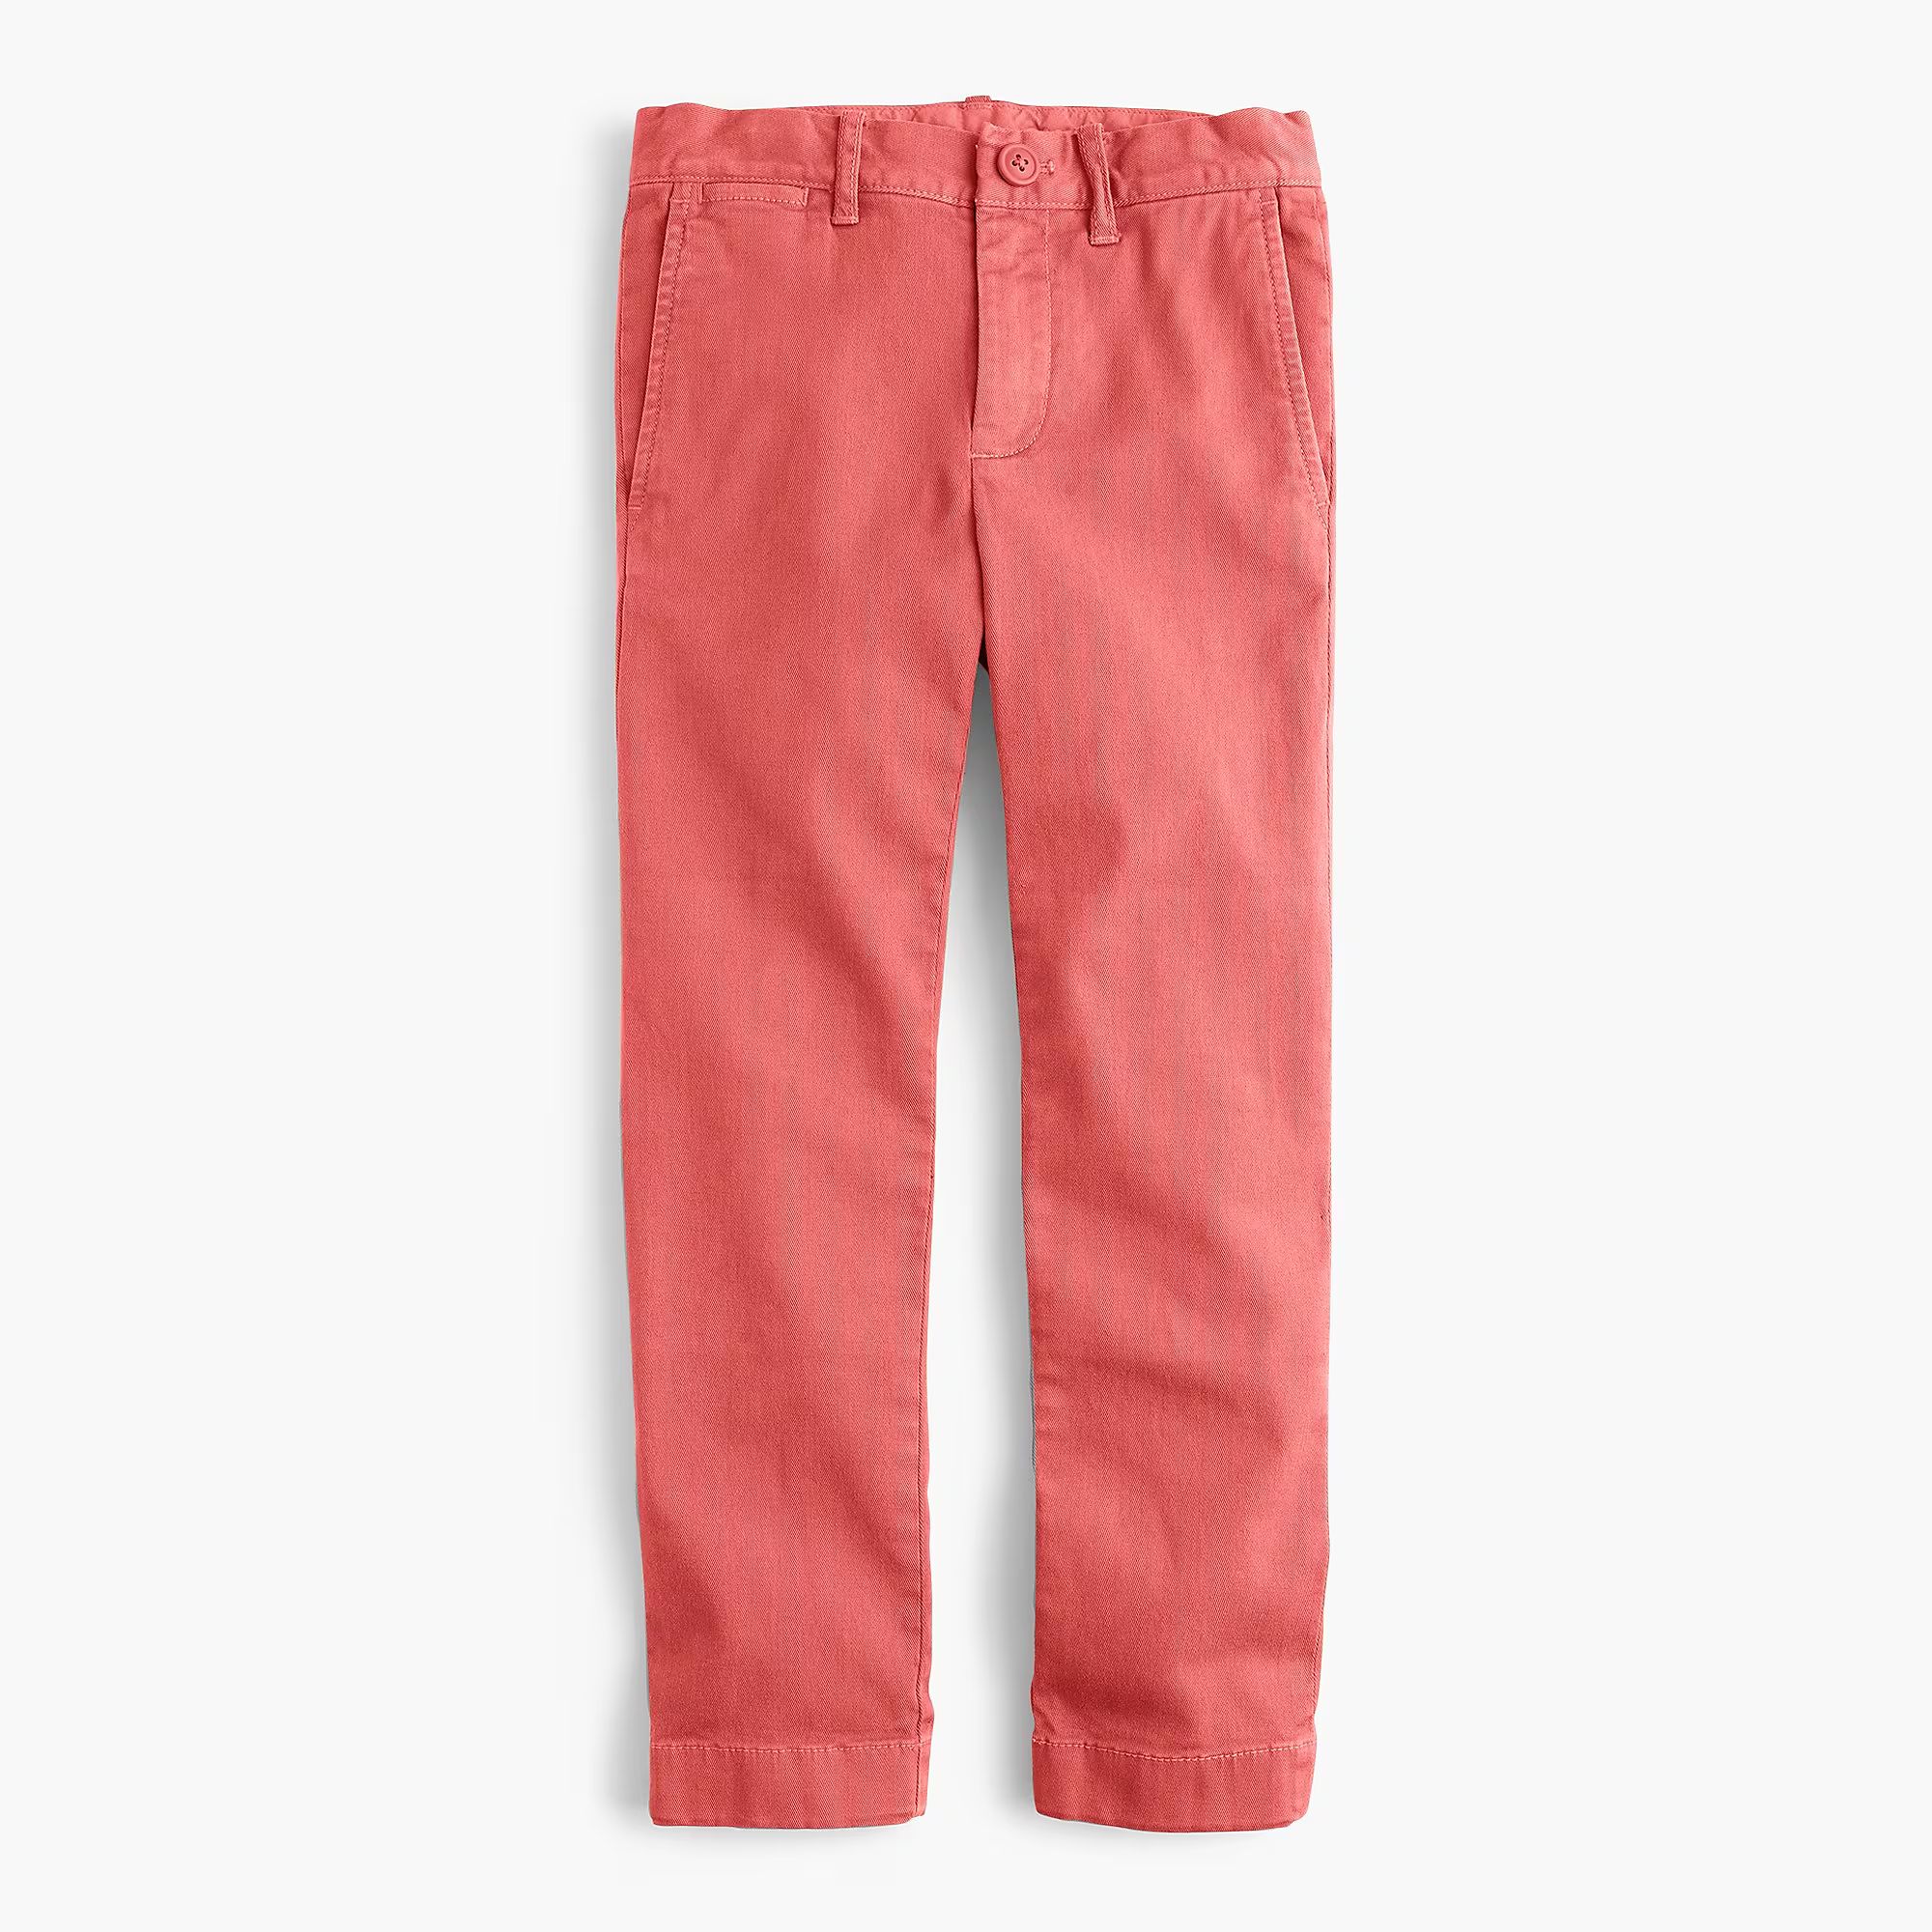 Boys' chino pant in stretch skinny fit | J.Crew US